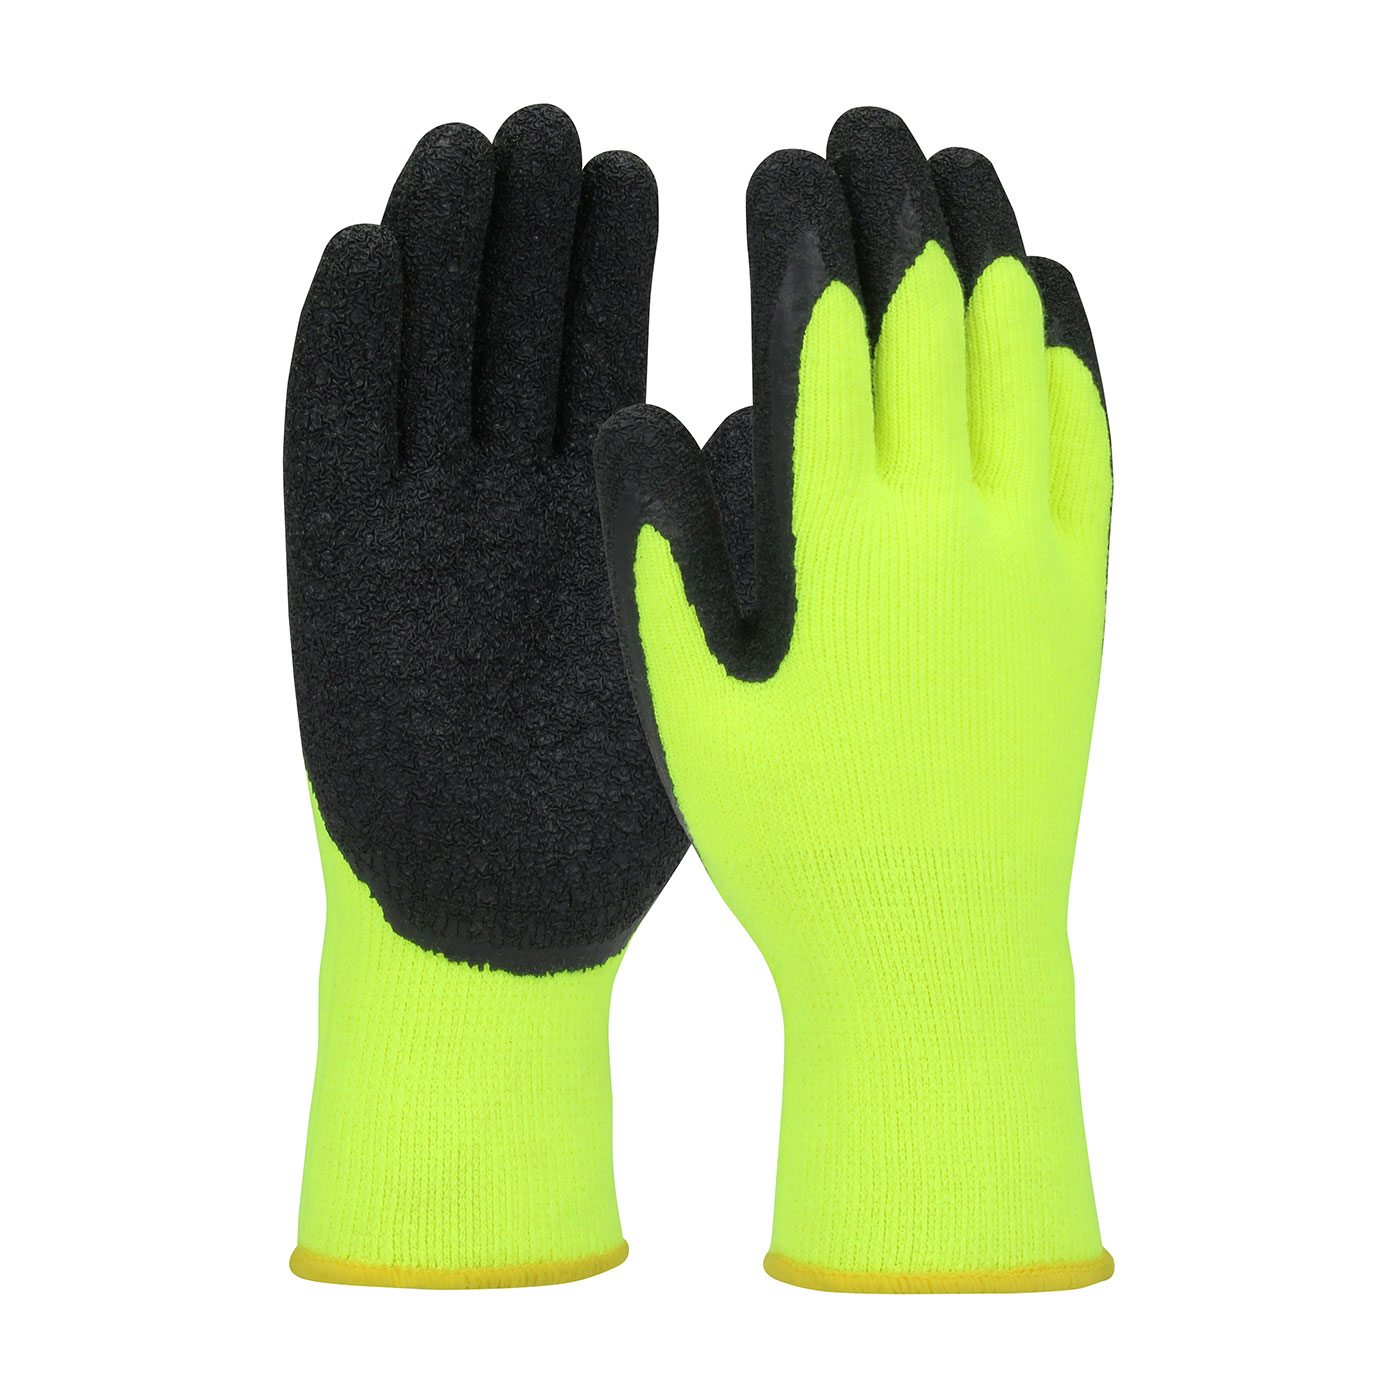 #41-1425 PIP® Hi-Vis Seamless Knit Brushed Acrylic Glove with Latex Coated Crinkle Grip on Palm & Fingers 